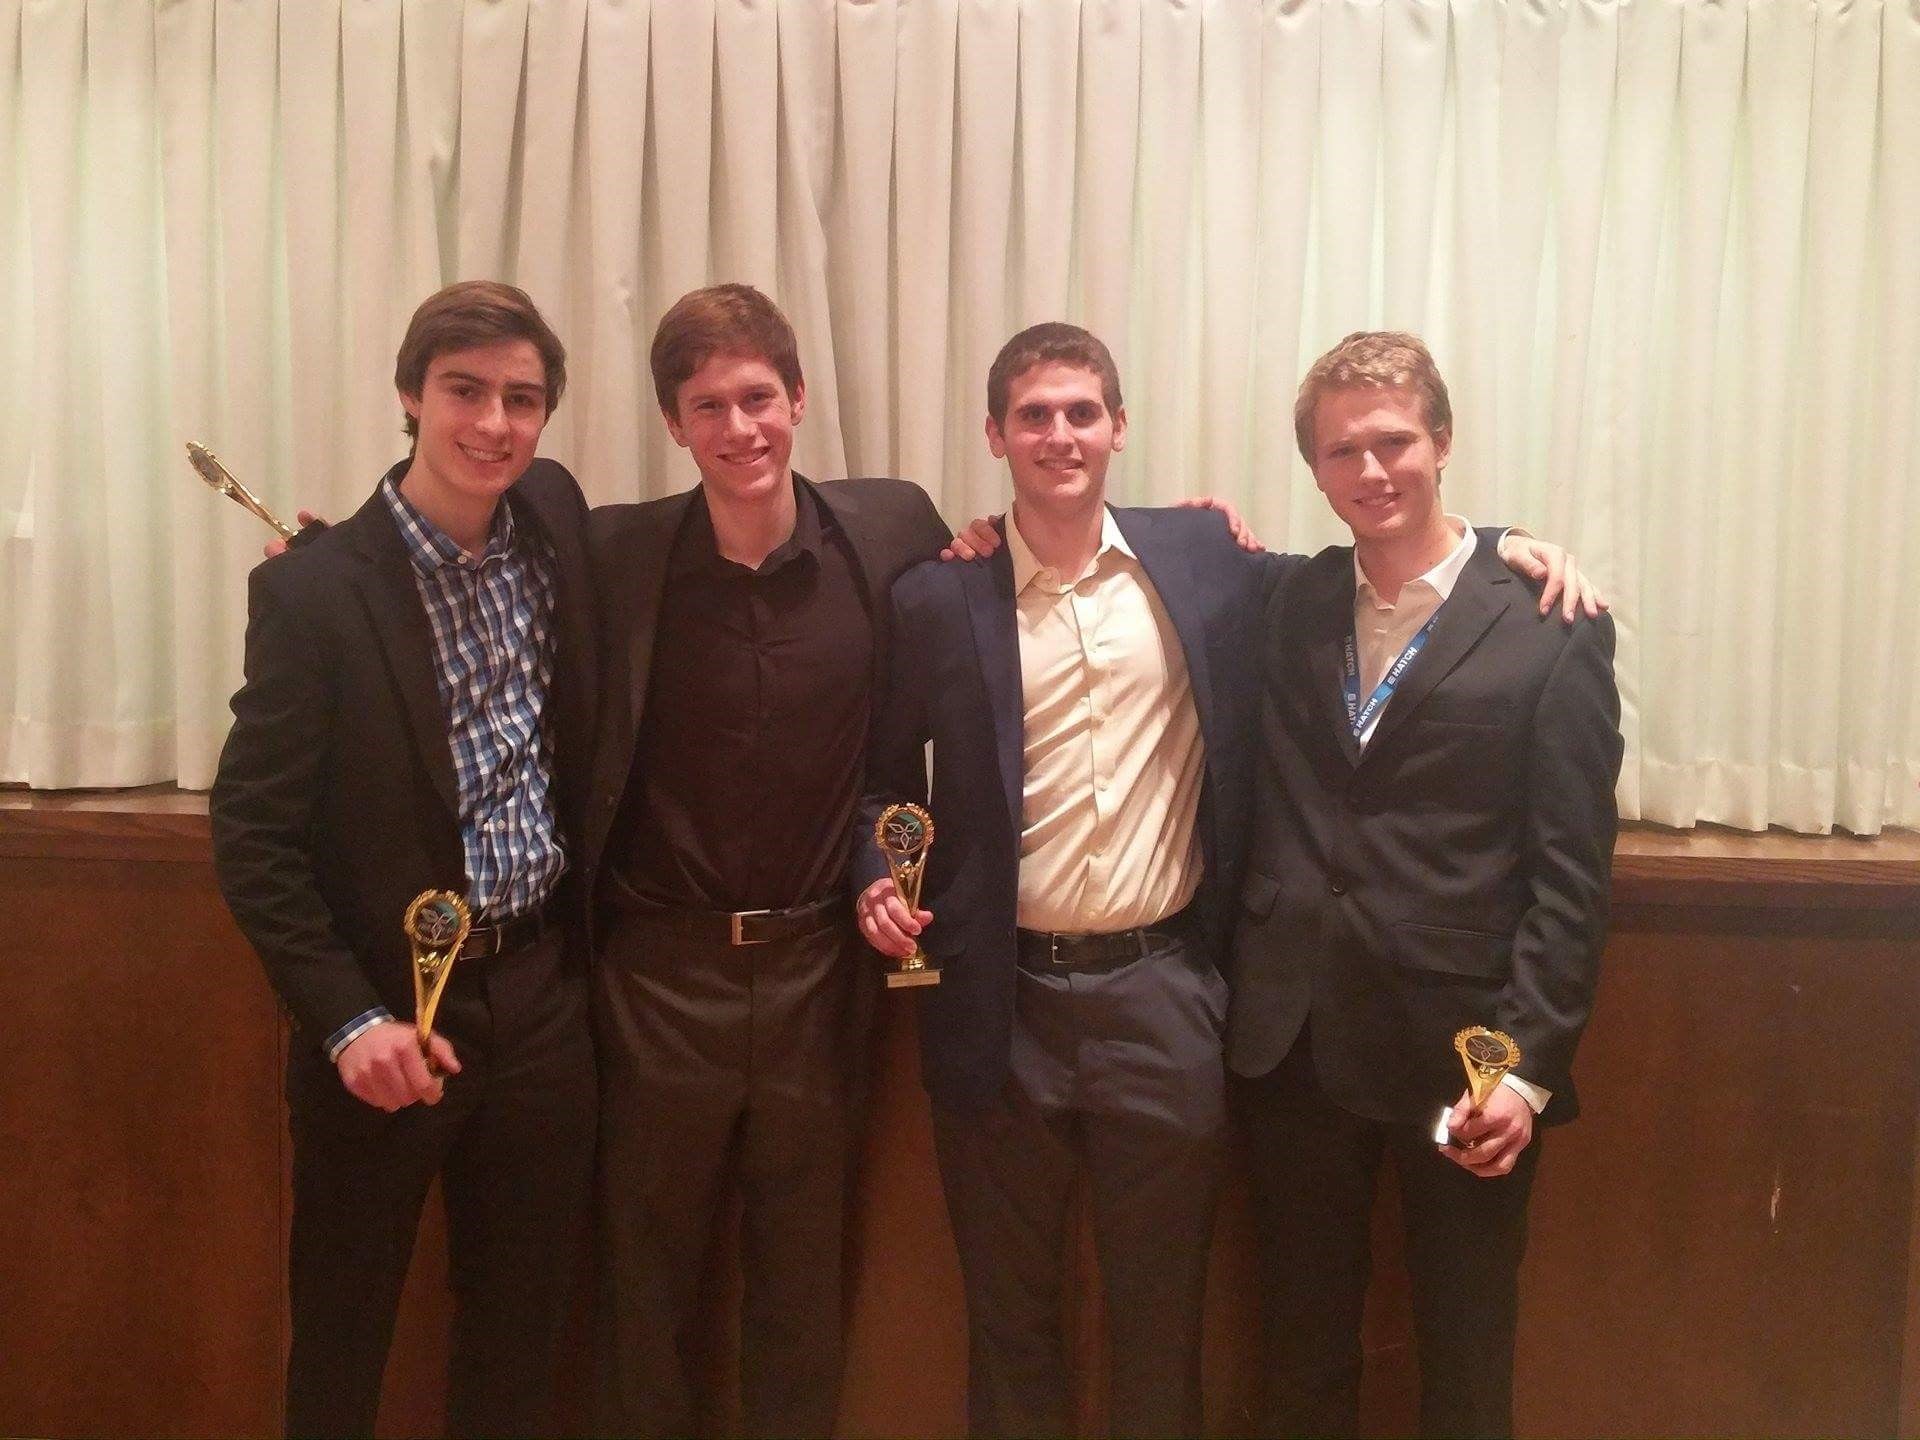 From the left, Jackson Fisher, Colin Cooke, Michael Jonas and Mitchell Catoen.